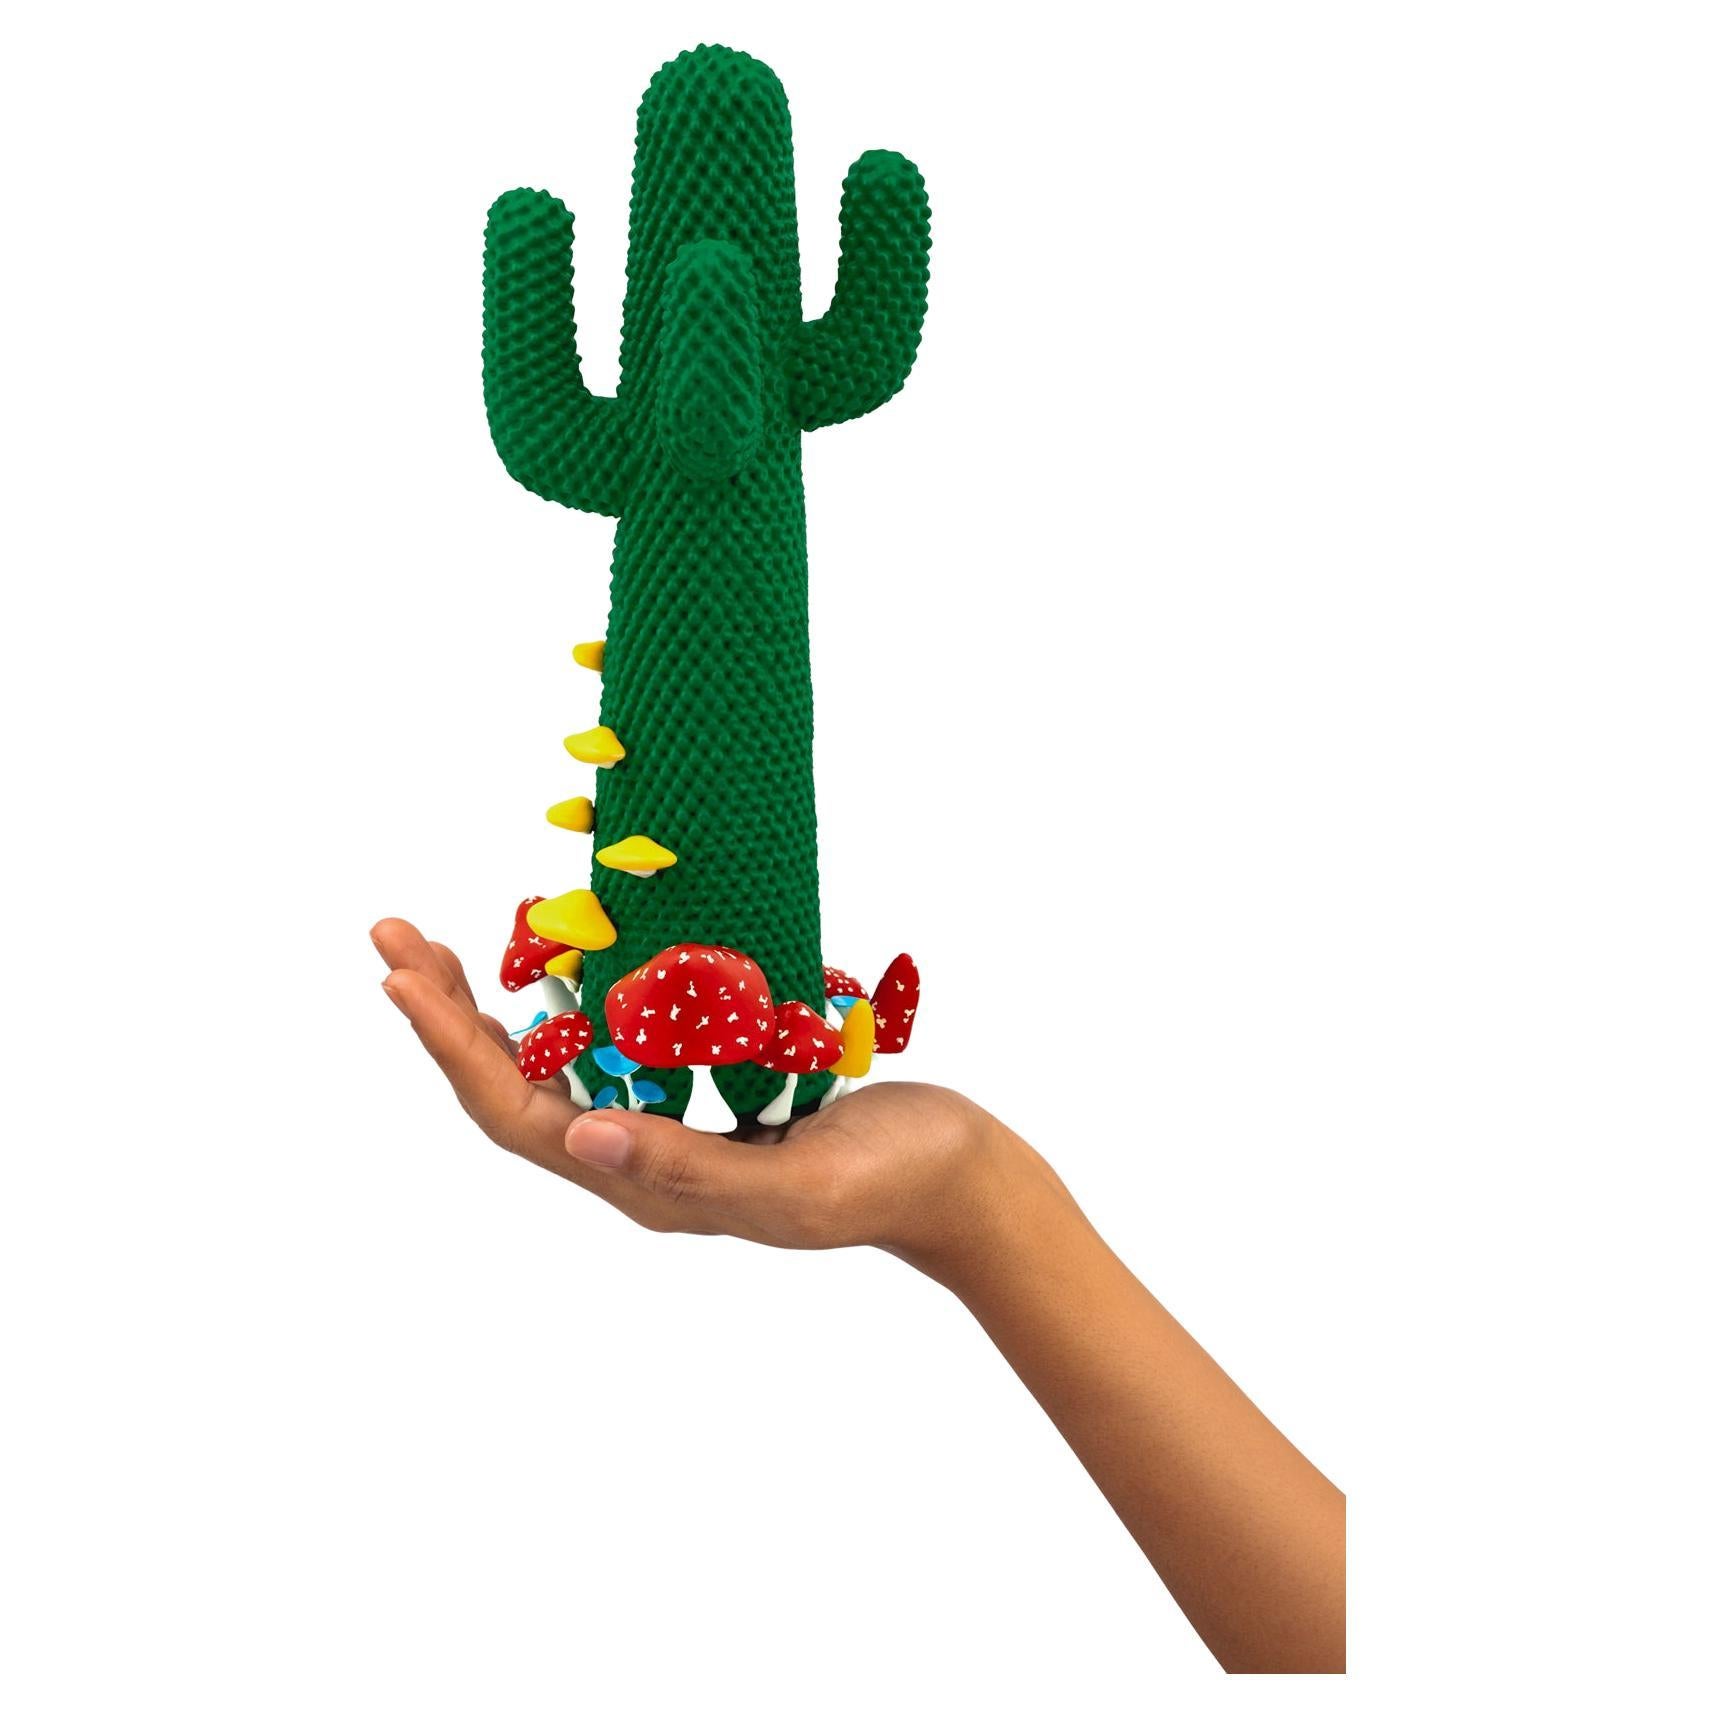 LIMITED EDITION #26/99

Gufram presents the miniaturised version of the Shroom CACTUS® created in collaboration with A$AP Rocky and the artist’s new design studio HOMMEMADE Exactly as the real-size Shroom CACTUS®, the new Guframini piece features